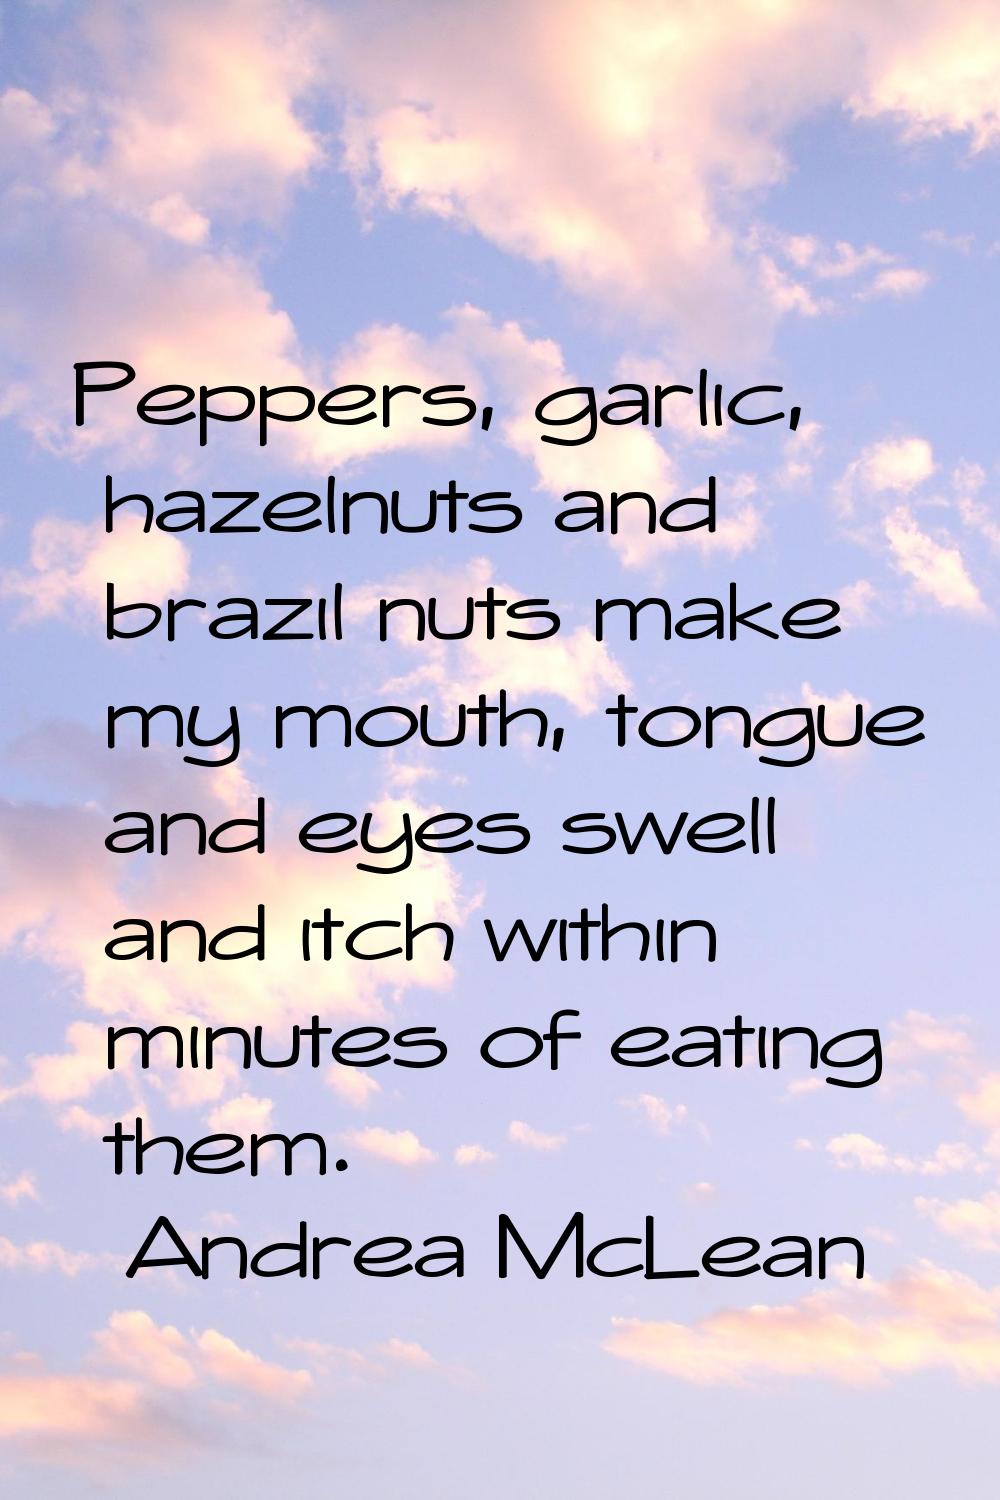 Peppers, garlic, hazelnuts and brazil nuts make my mouth, tongue and eyes swell and itch within min